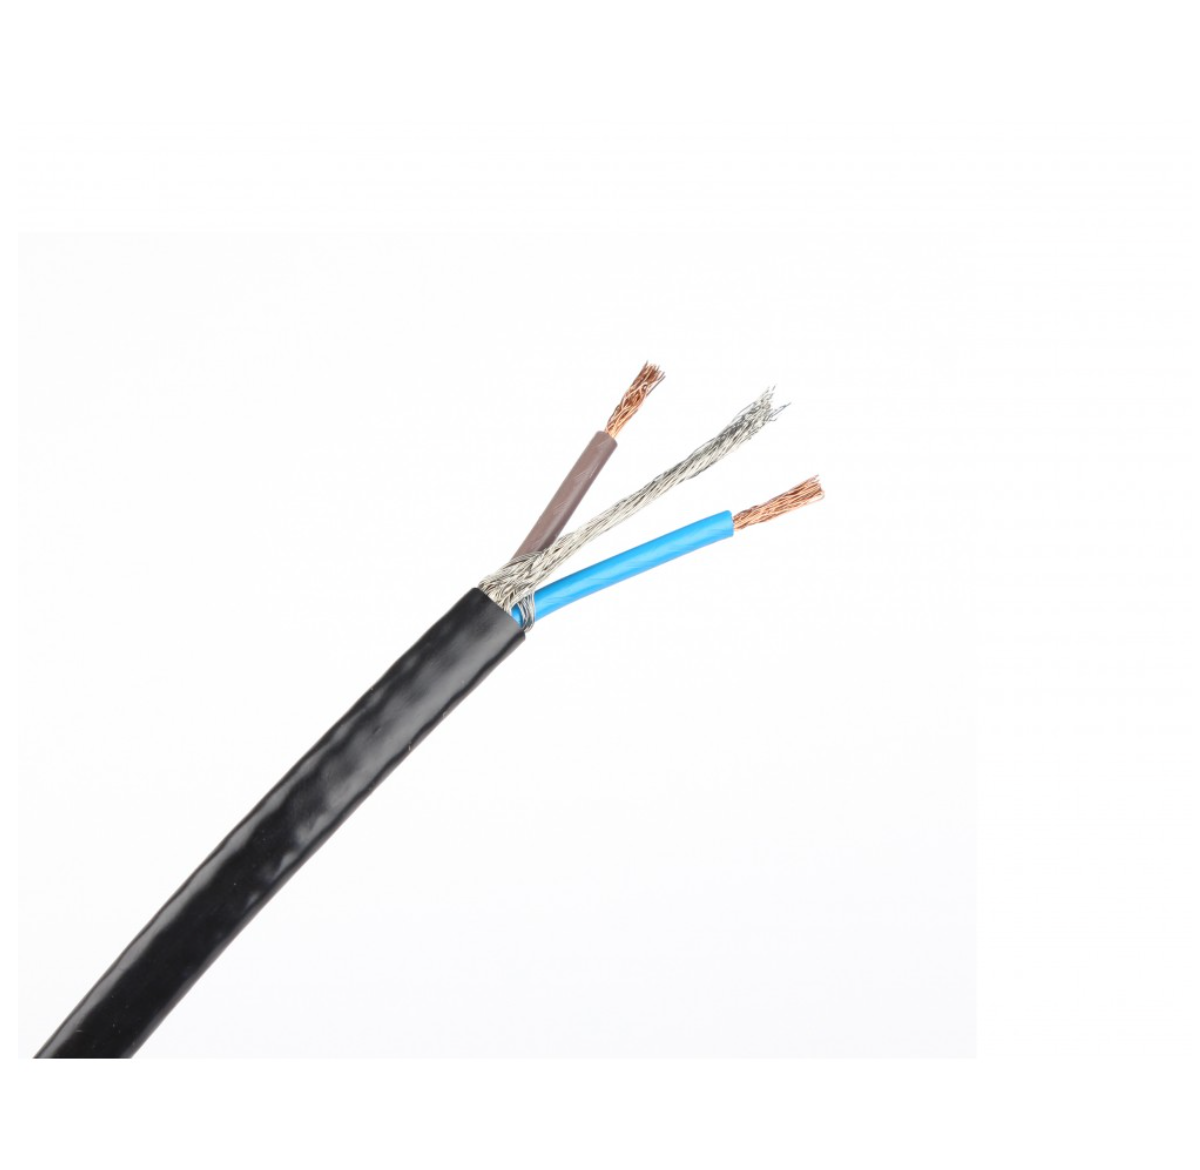 Heating cable - 35m